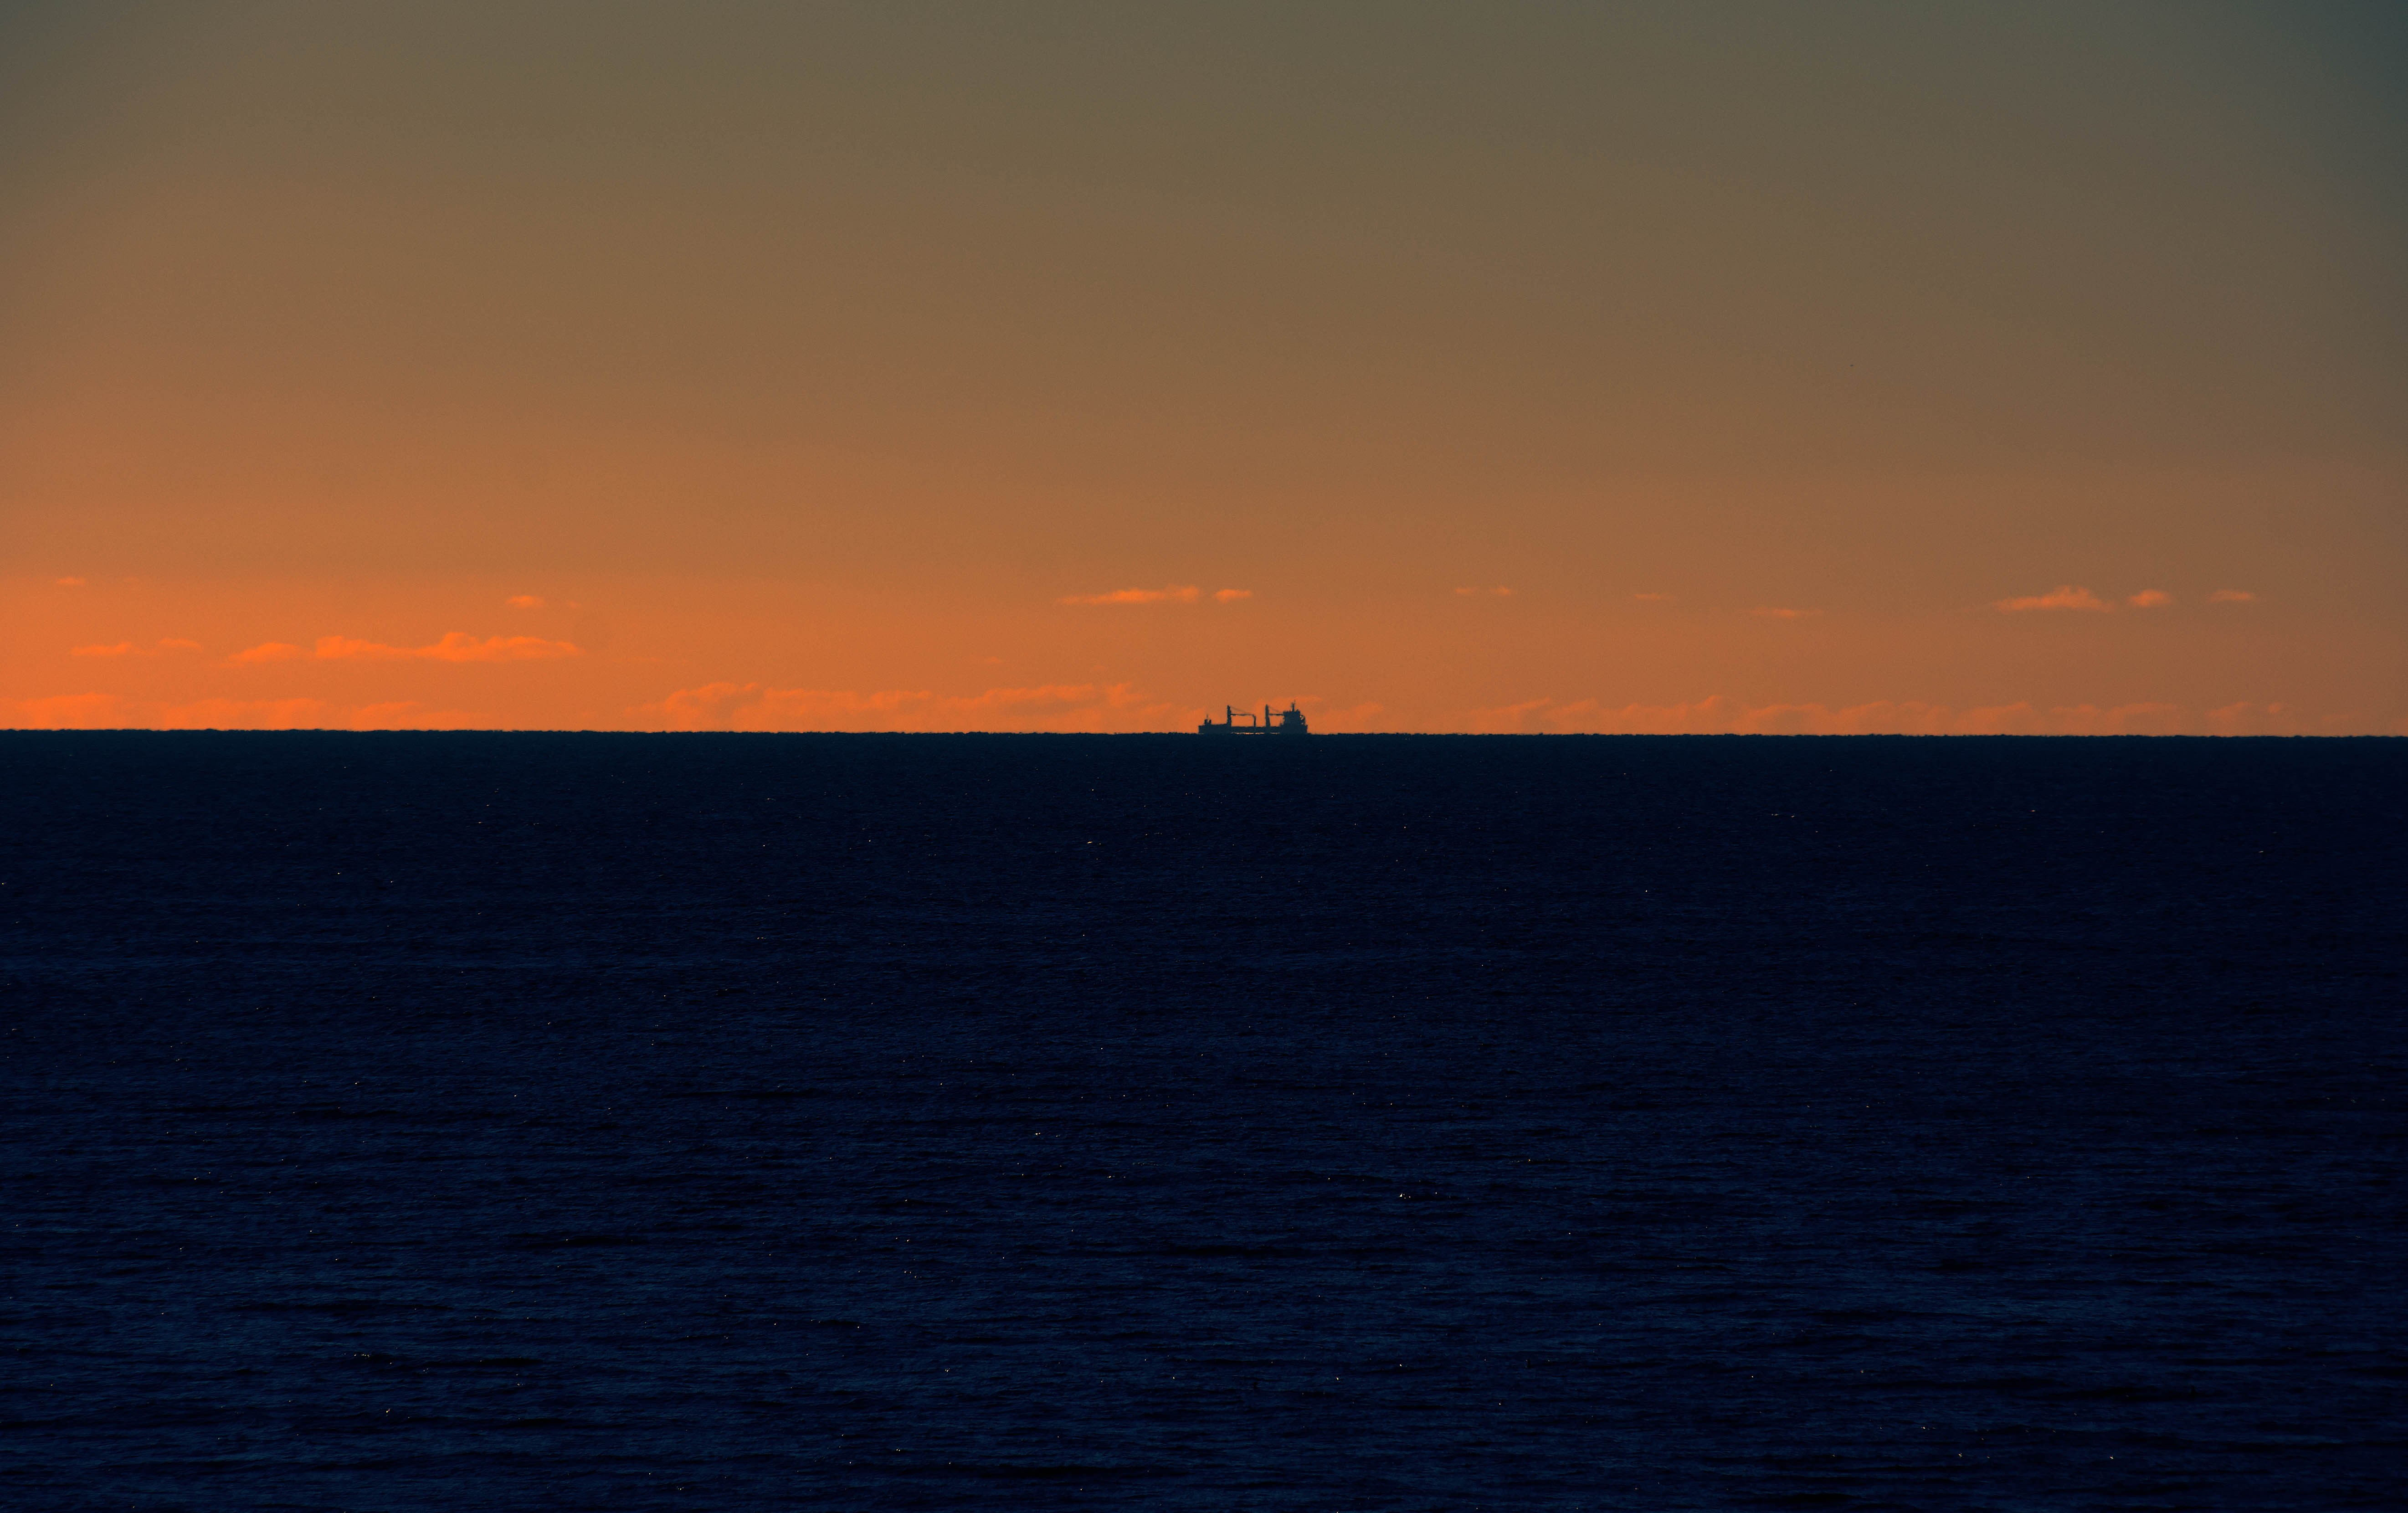 20170115-Sailing into the sunset.jpg